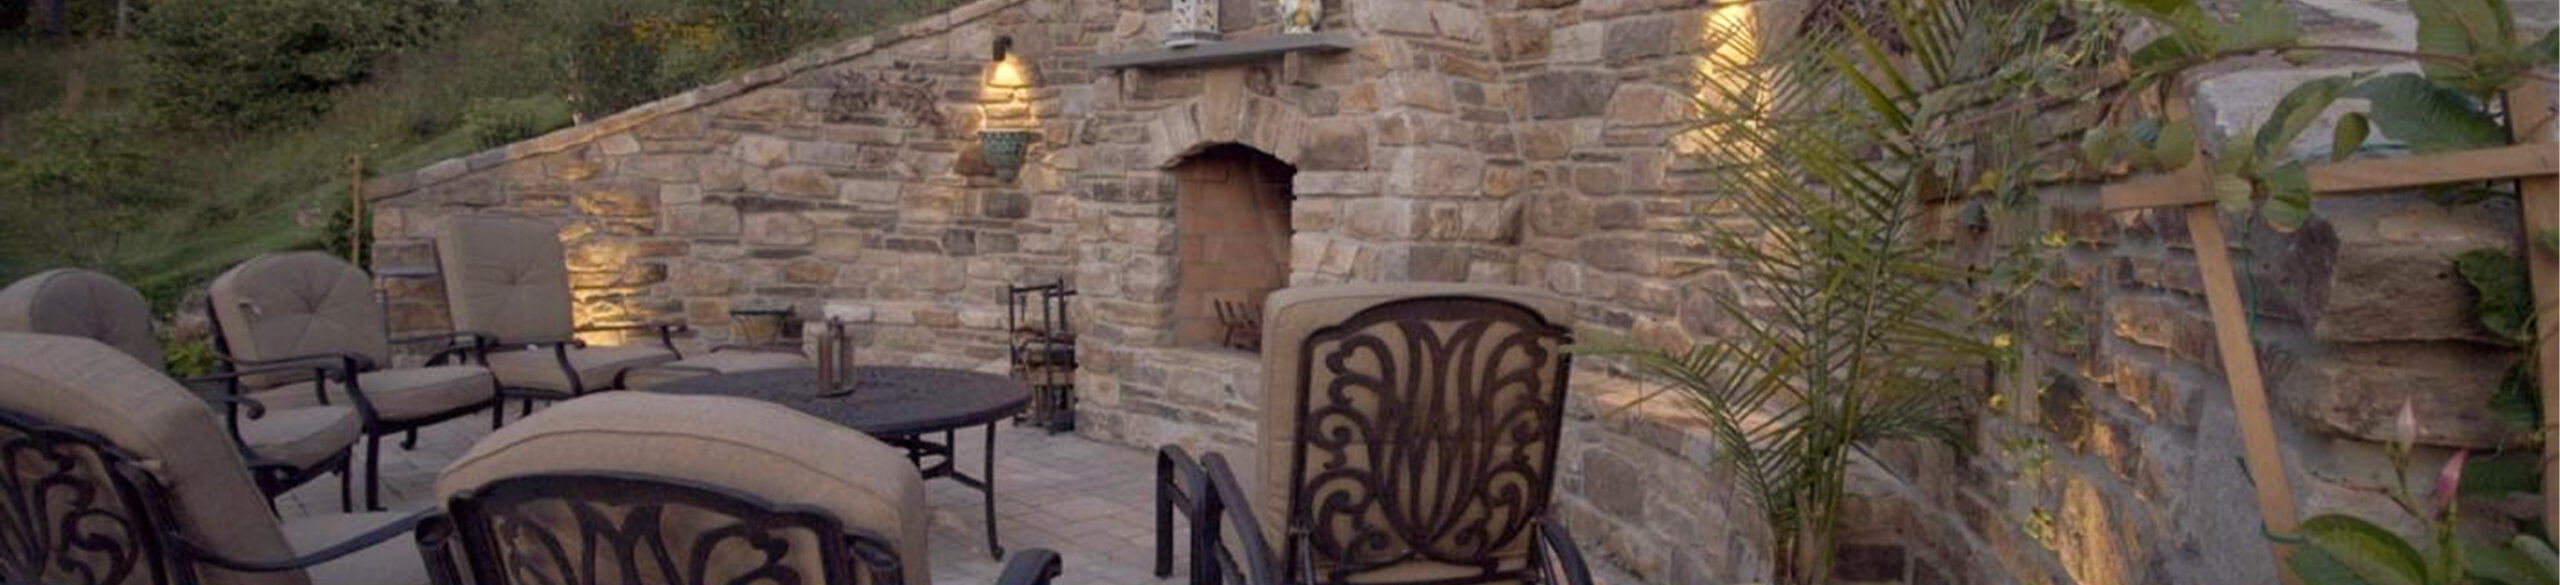 Outdoor patio area with seating and fire pit from CKC Landscaping